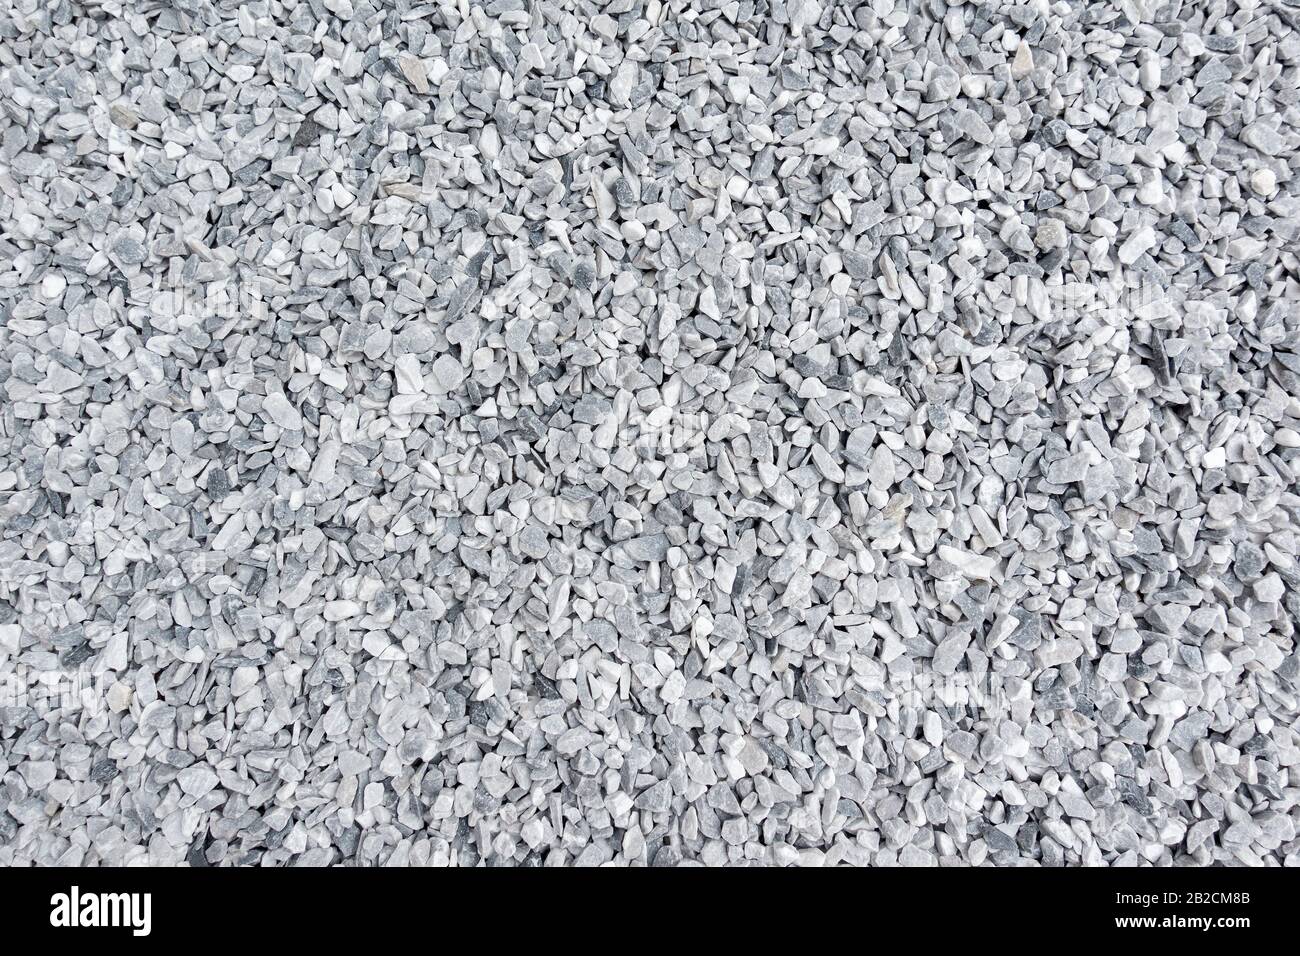 Area with light gray grit in closeup Stock Photo